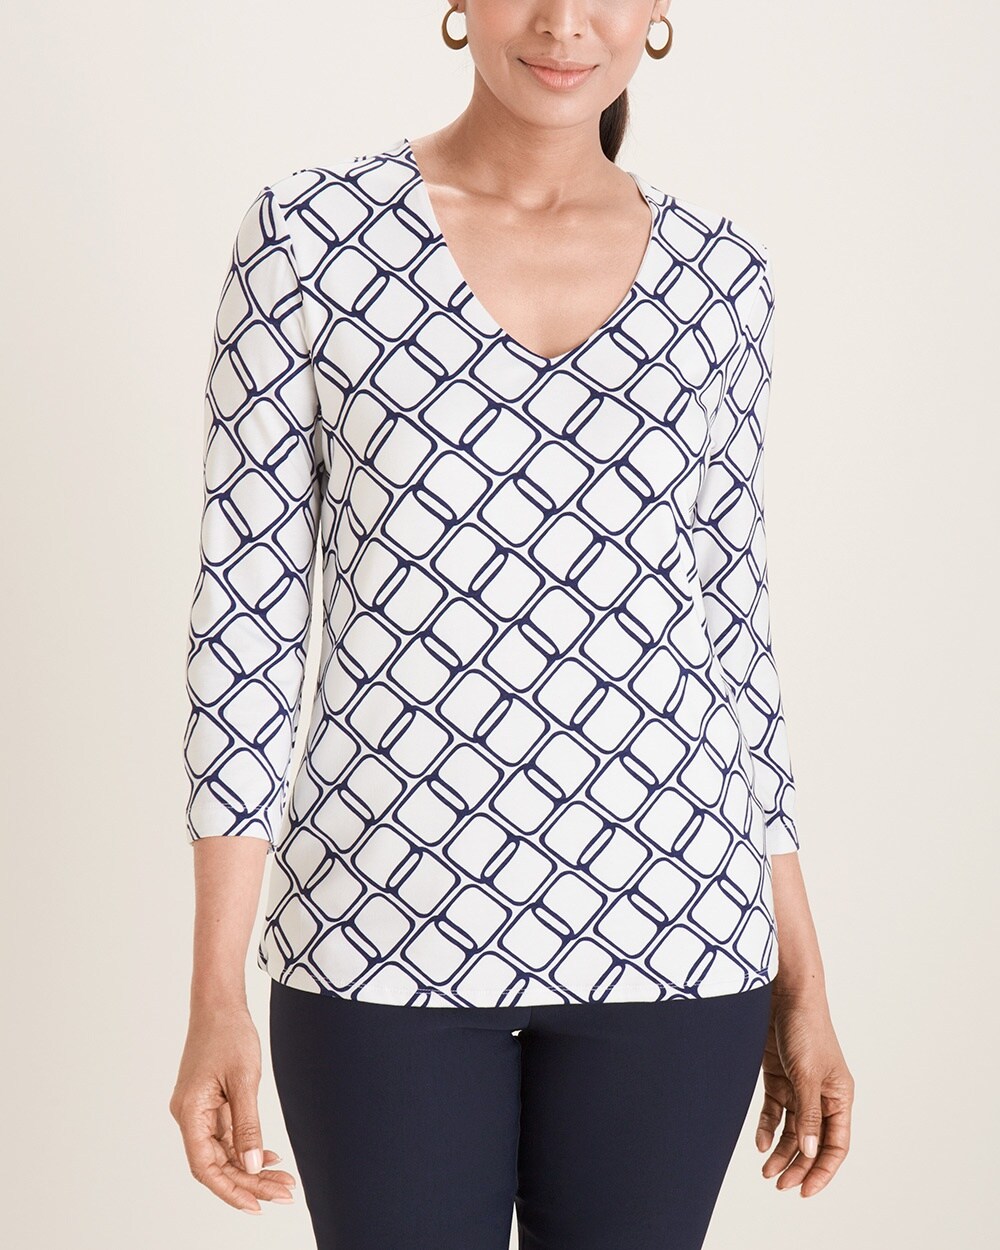 Touch of Cool Encircled Squares Layering Tee